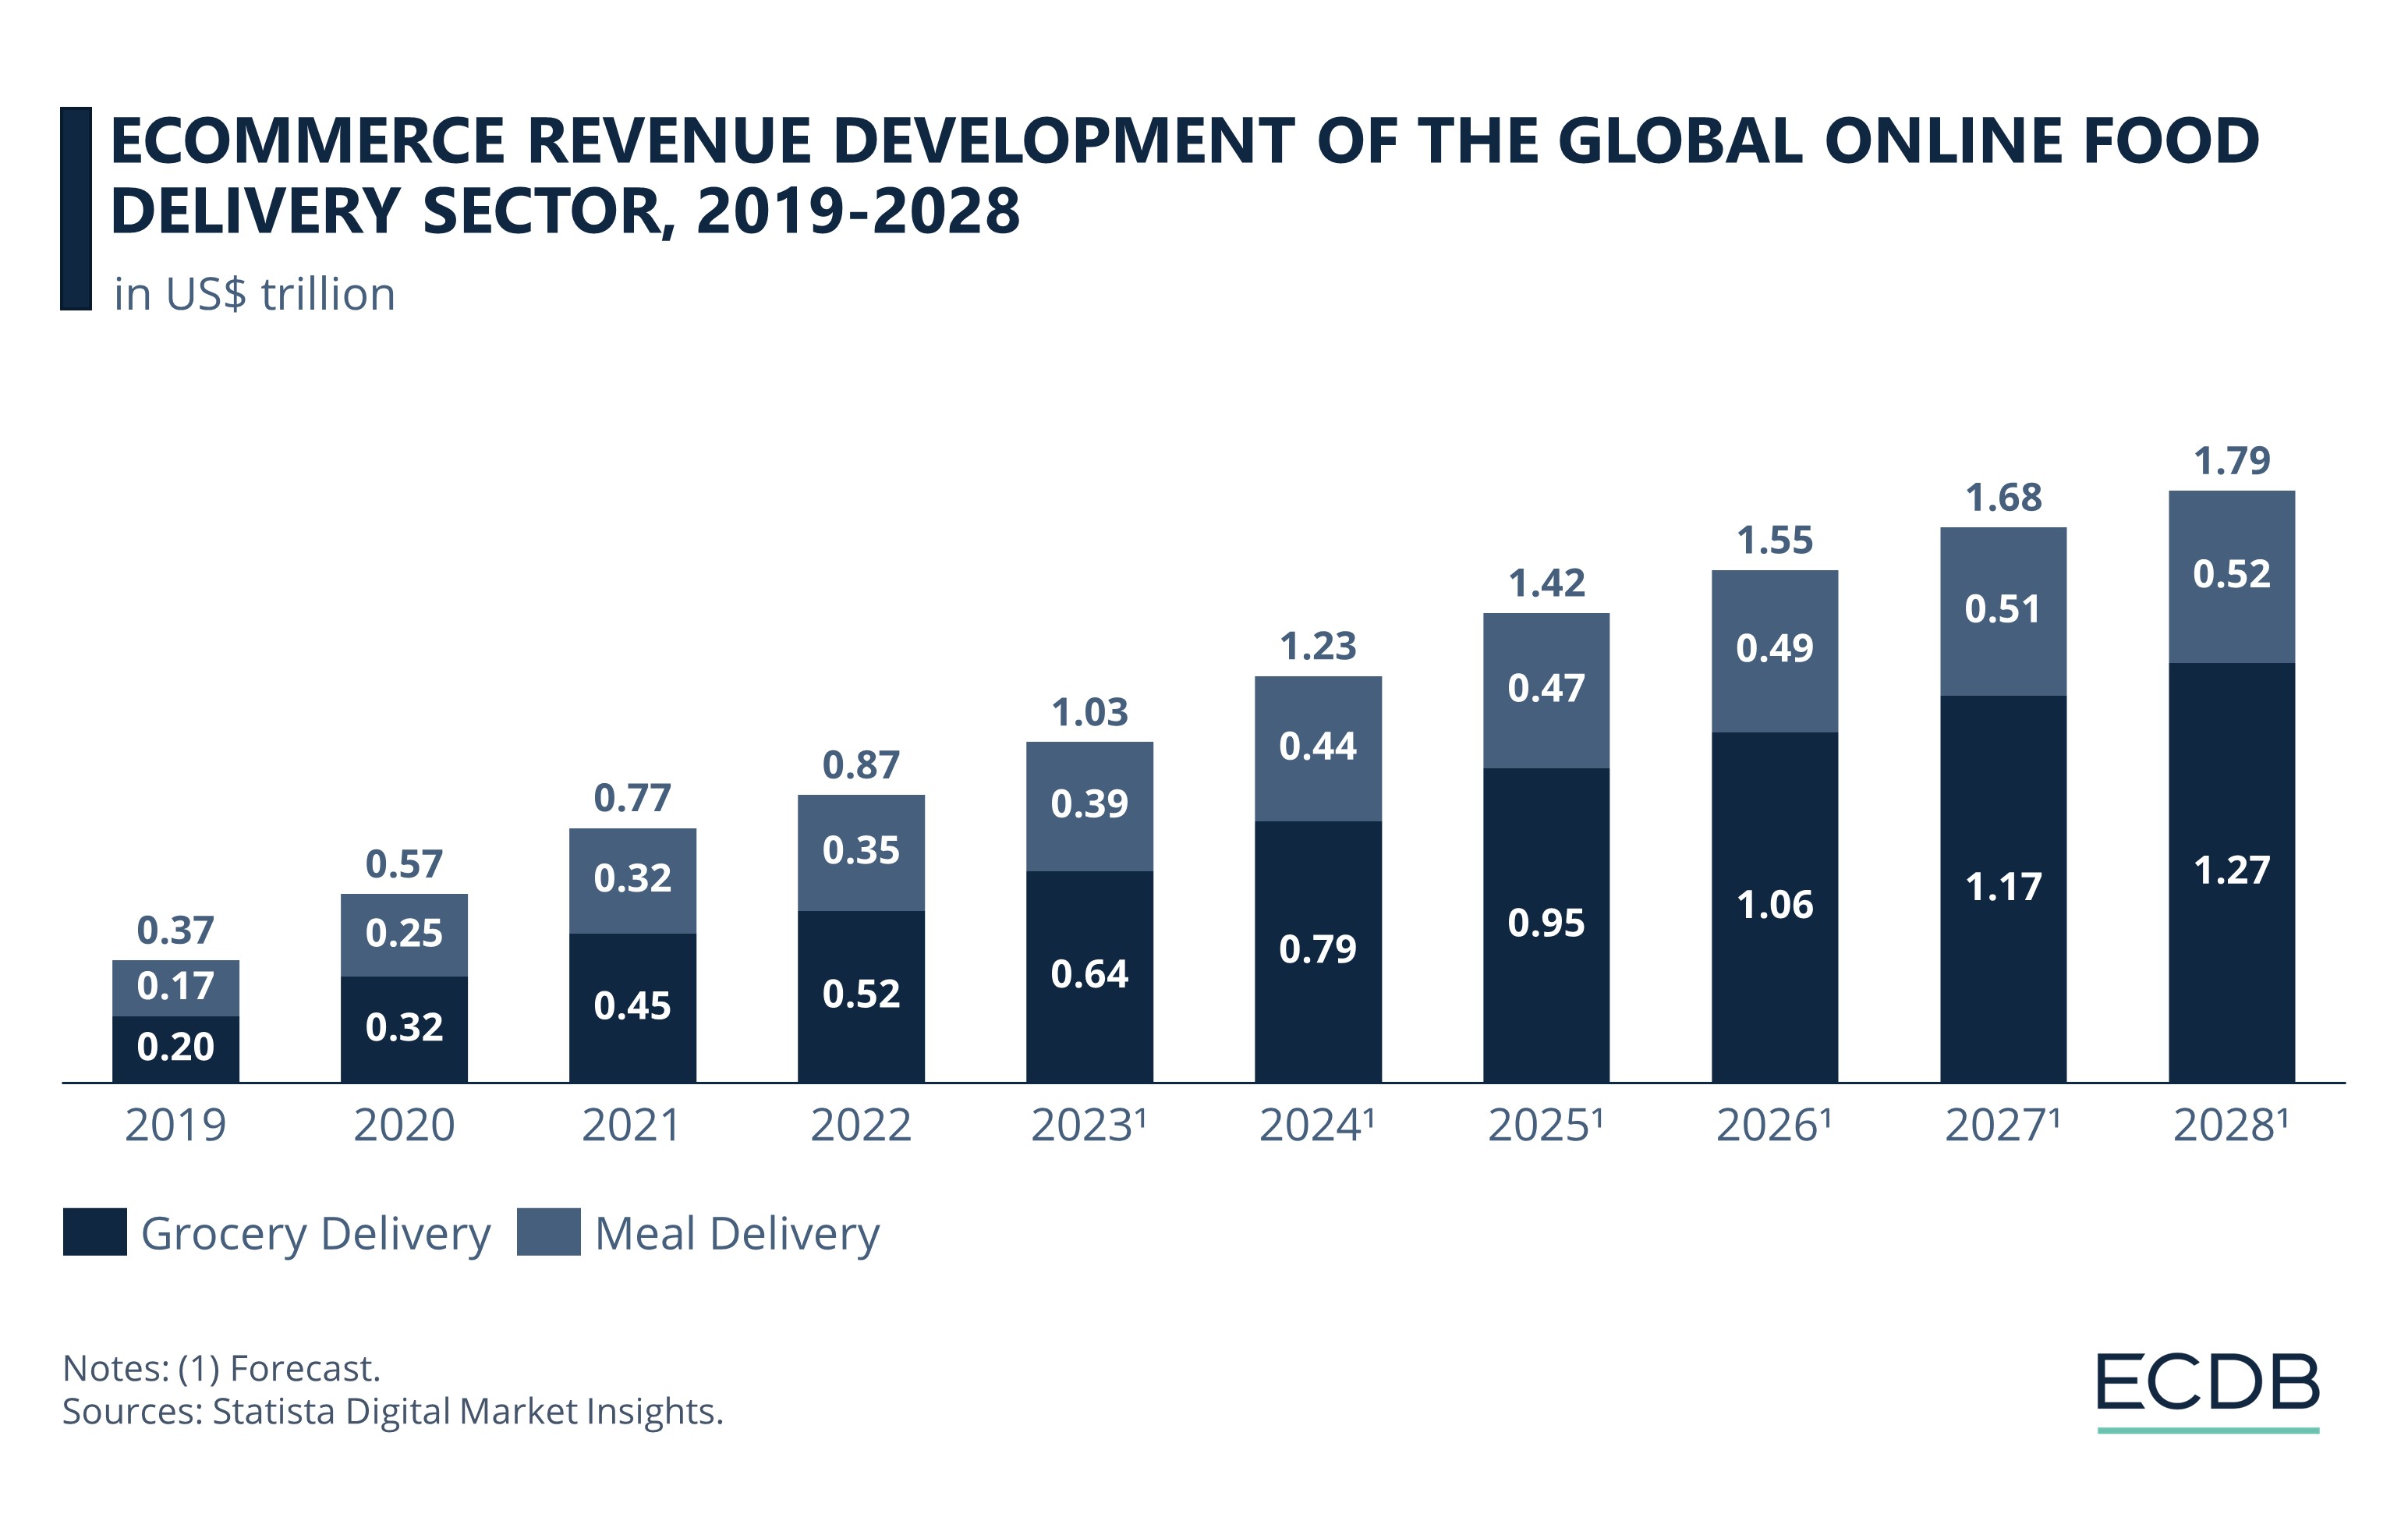 eCommerce Revenue Development of the Global Online Food Delivery Sector, 2019-2028